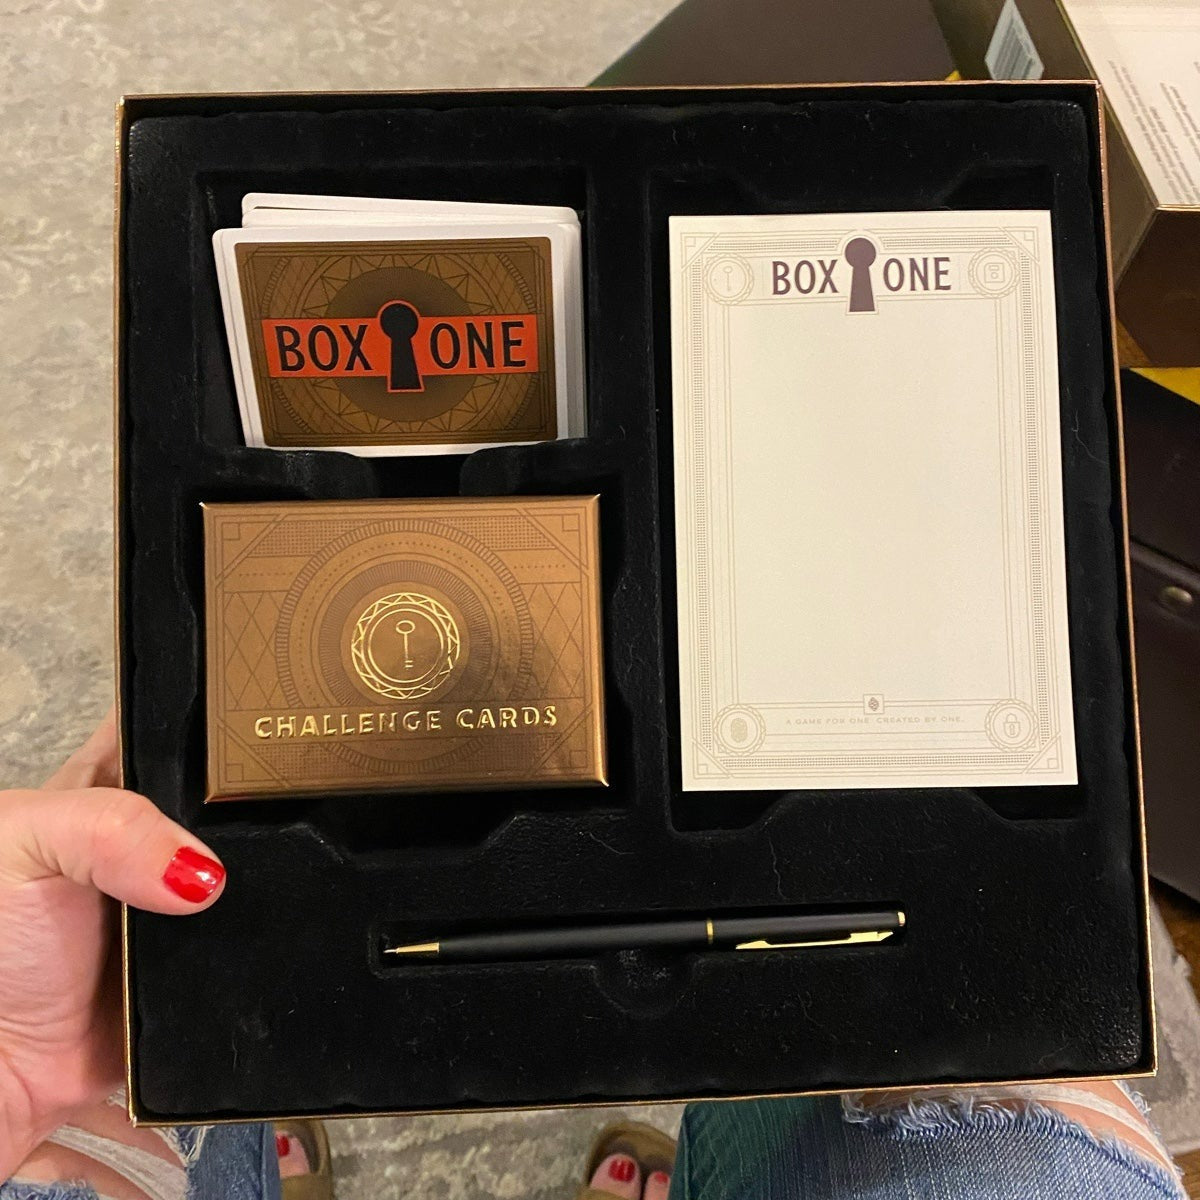 Limited Exclusive Edition Box One Presented by Neil Patrick Harris Game